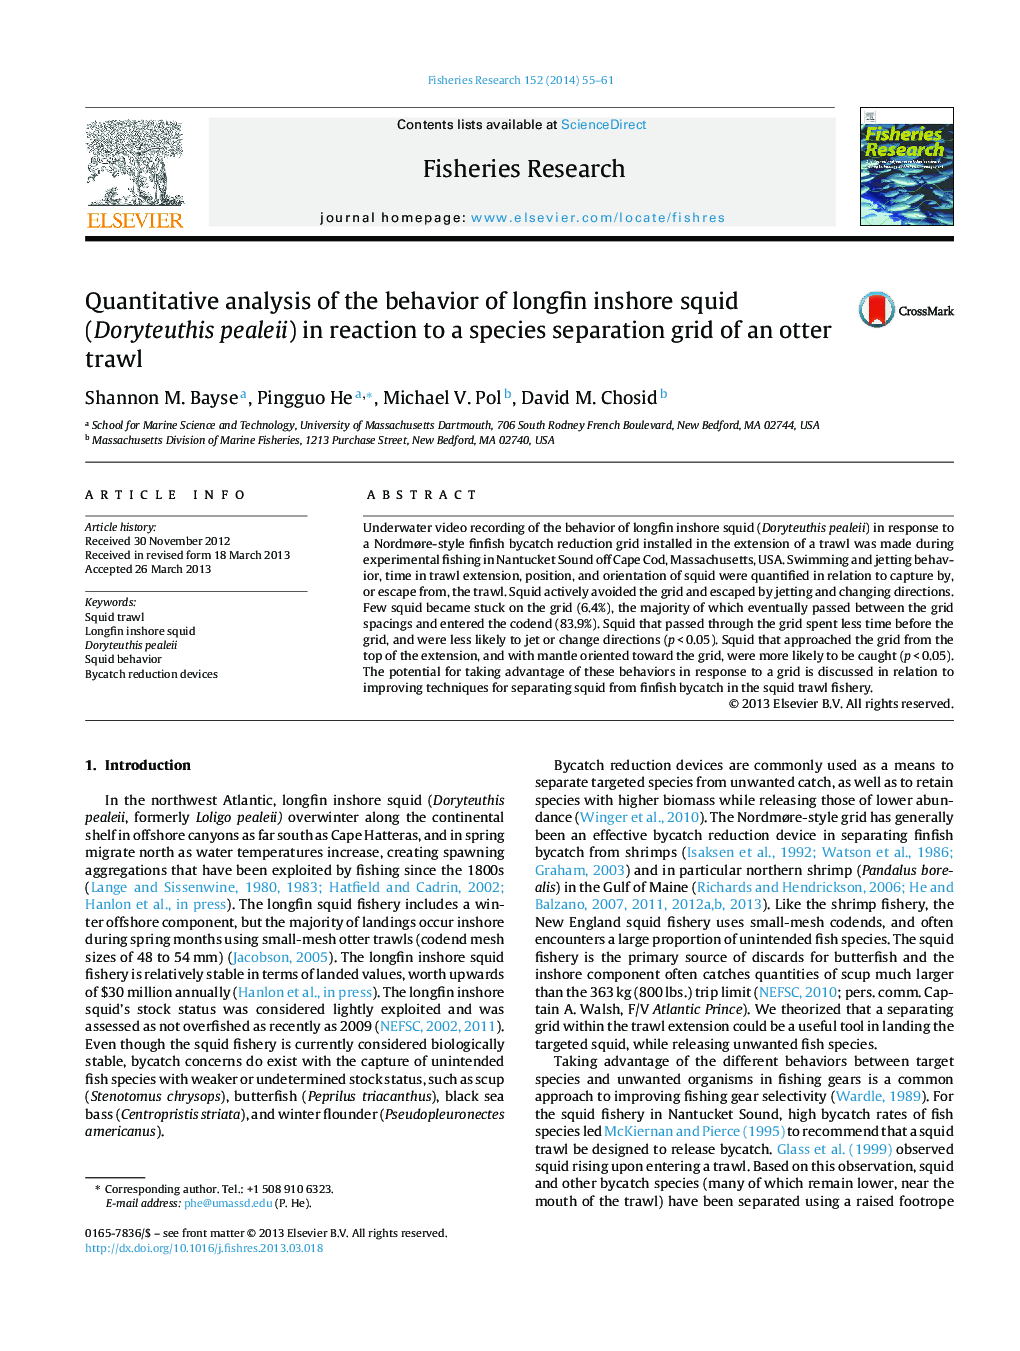 Quantitative analysis of the behavior of longfin inshore squid (Doryteuthis pealeii) in reaction to a species separation grid of an otter trawl